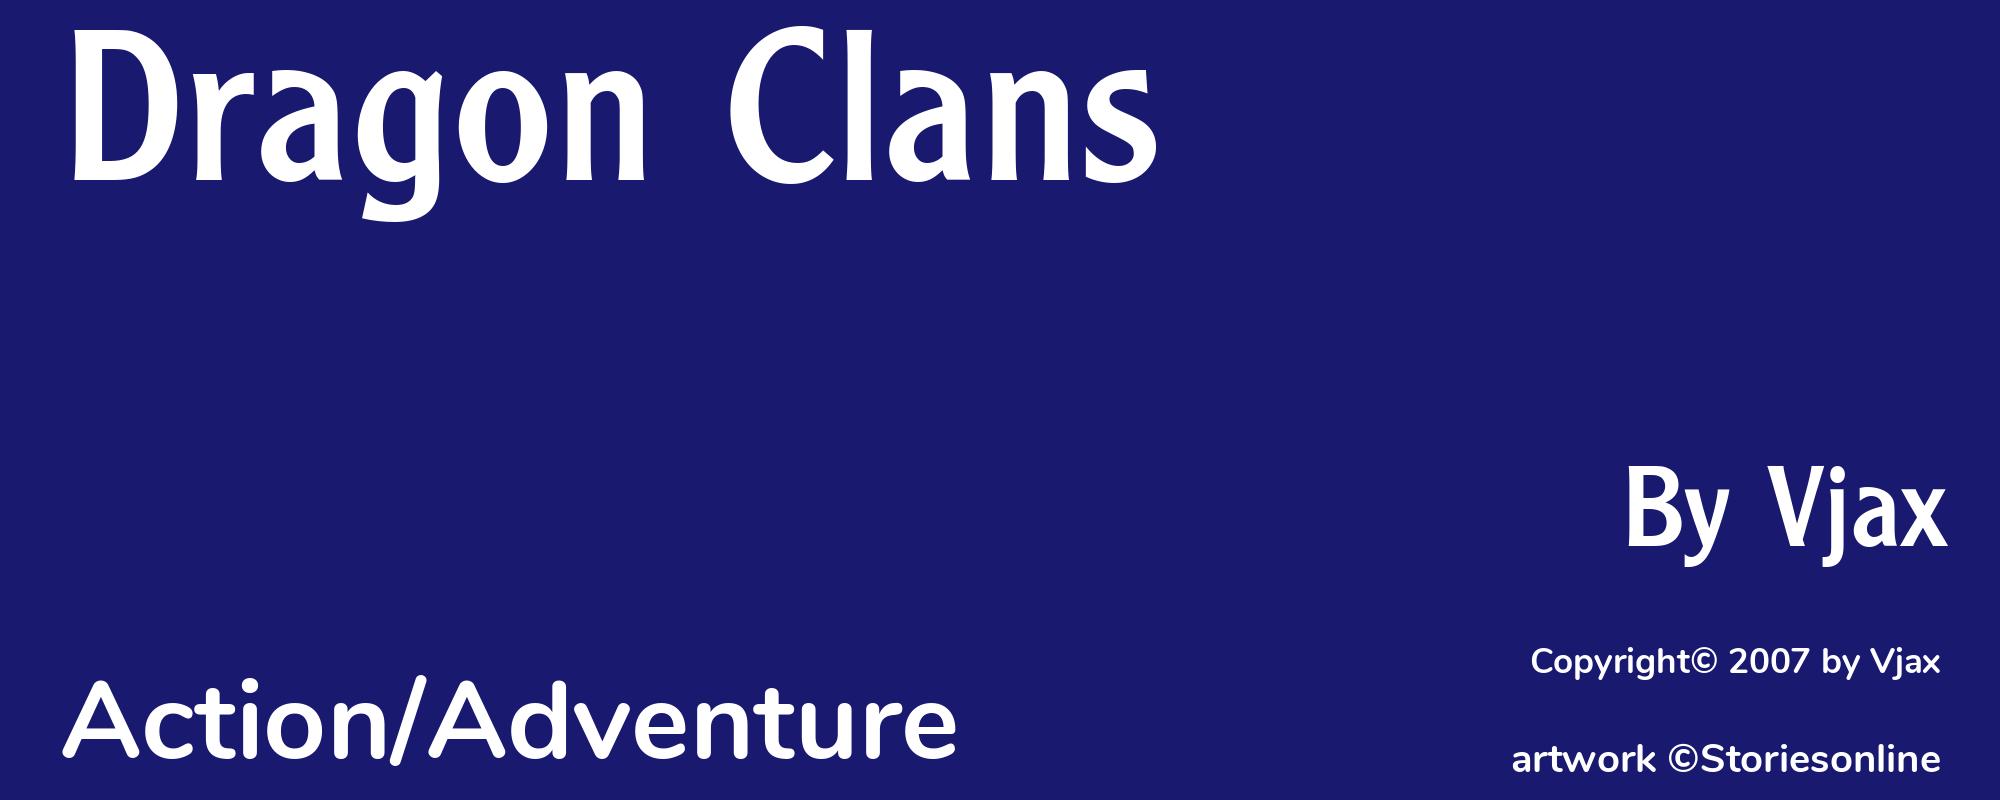 Dragon Clans - Cover